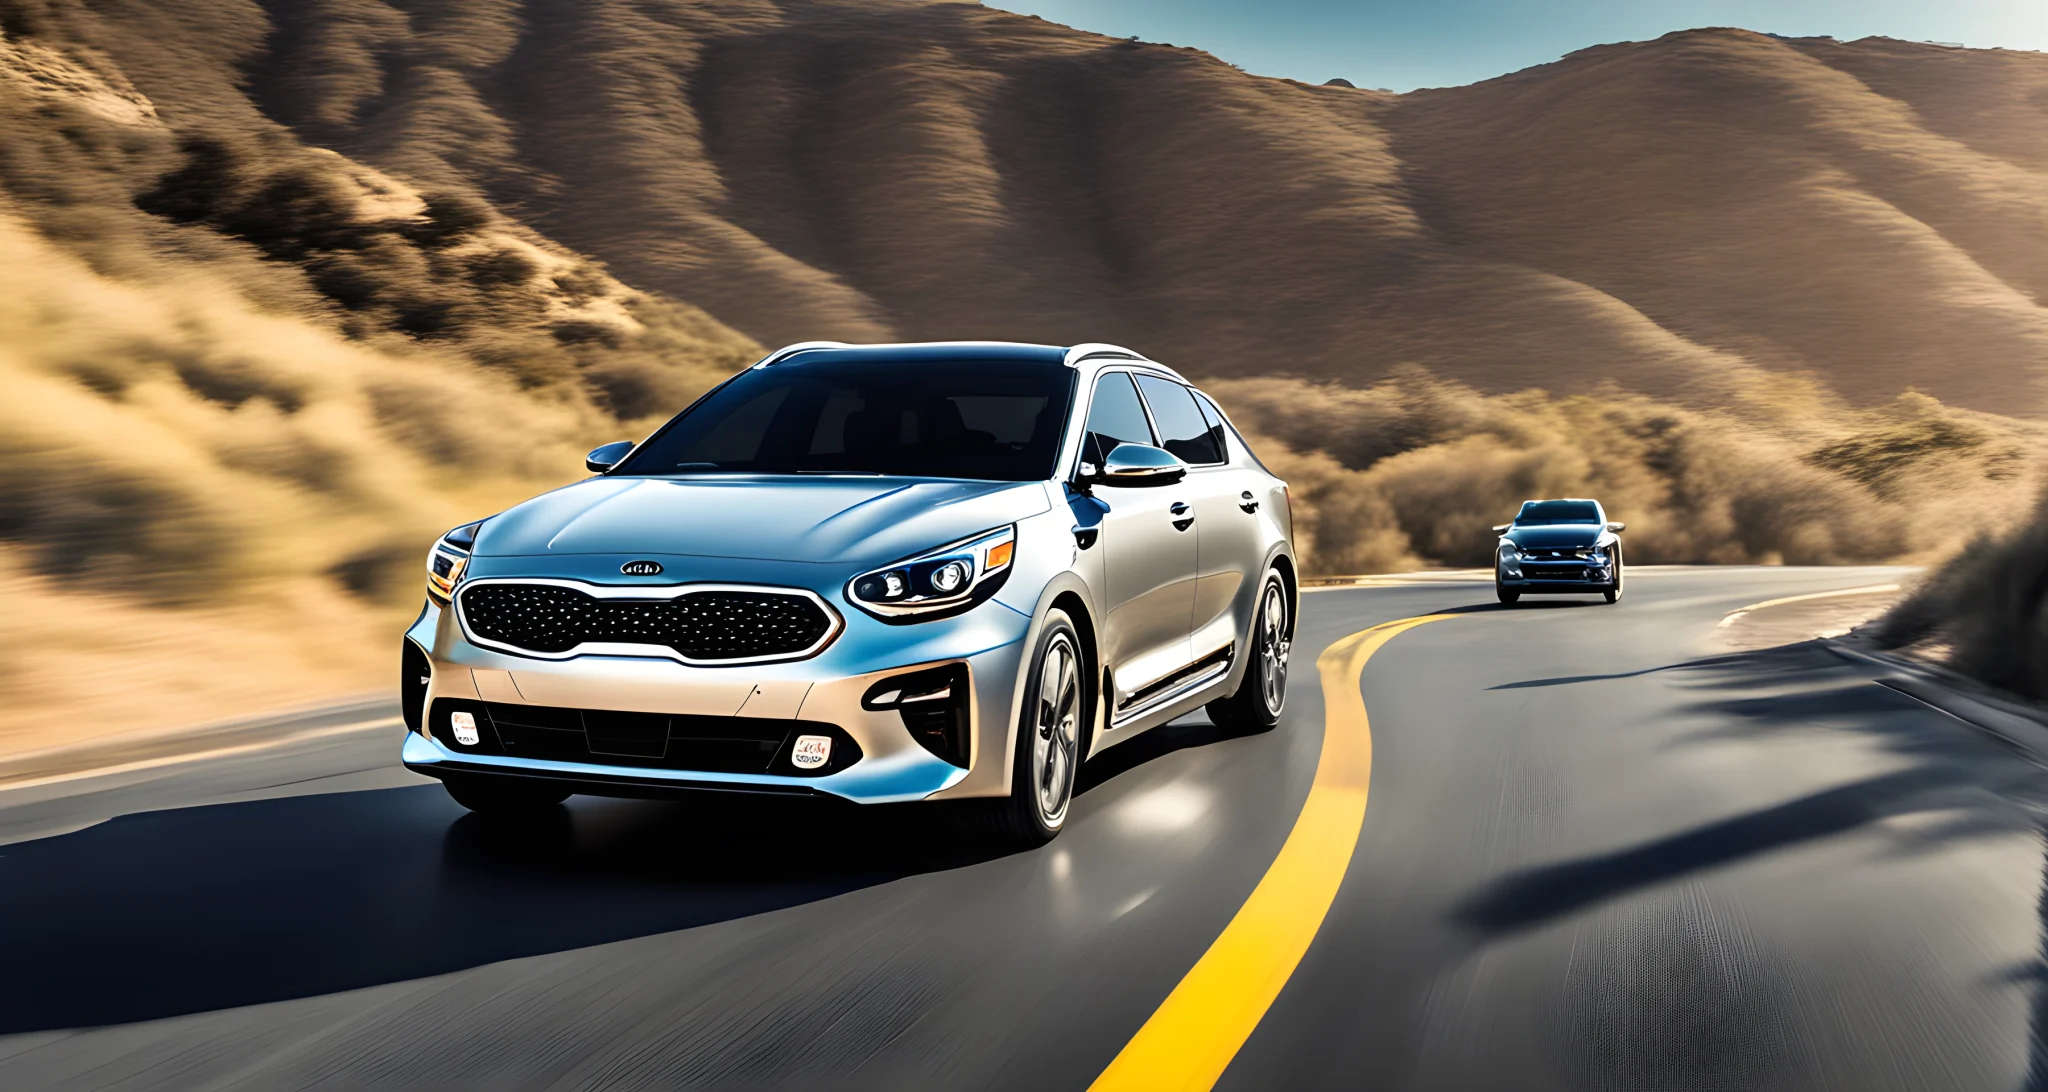 The image shows a Kia vehicle equipped with advanced driver assistance systems (ADAS) such as lane departure warning, automatic emergency braking, and adaptive cruise control.